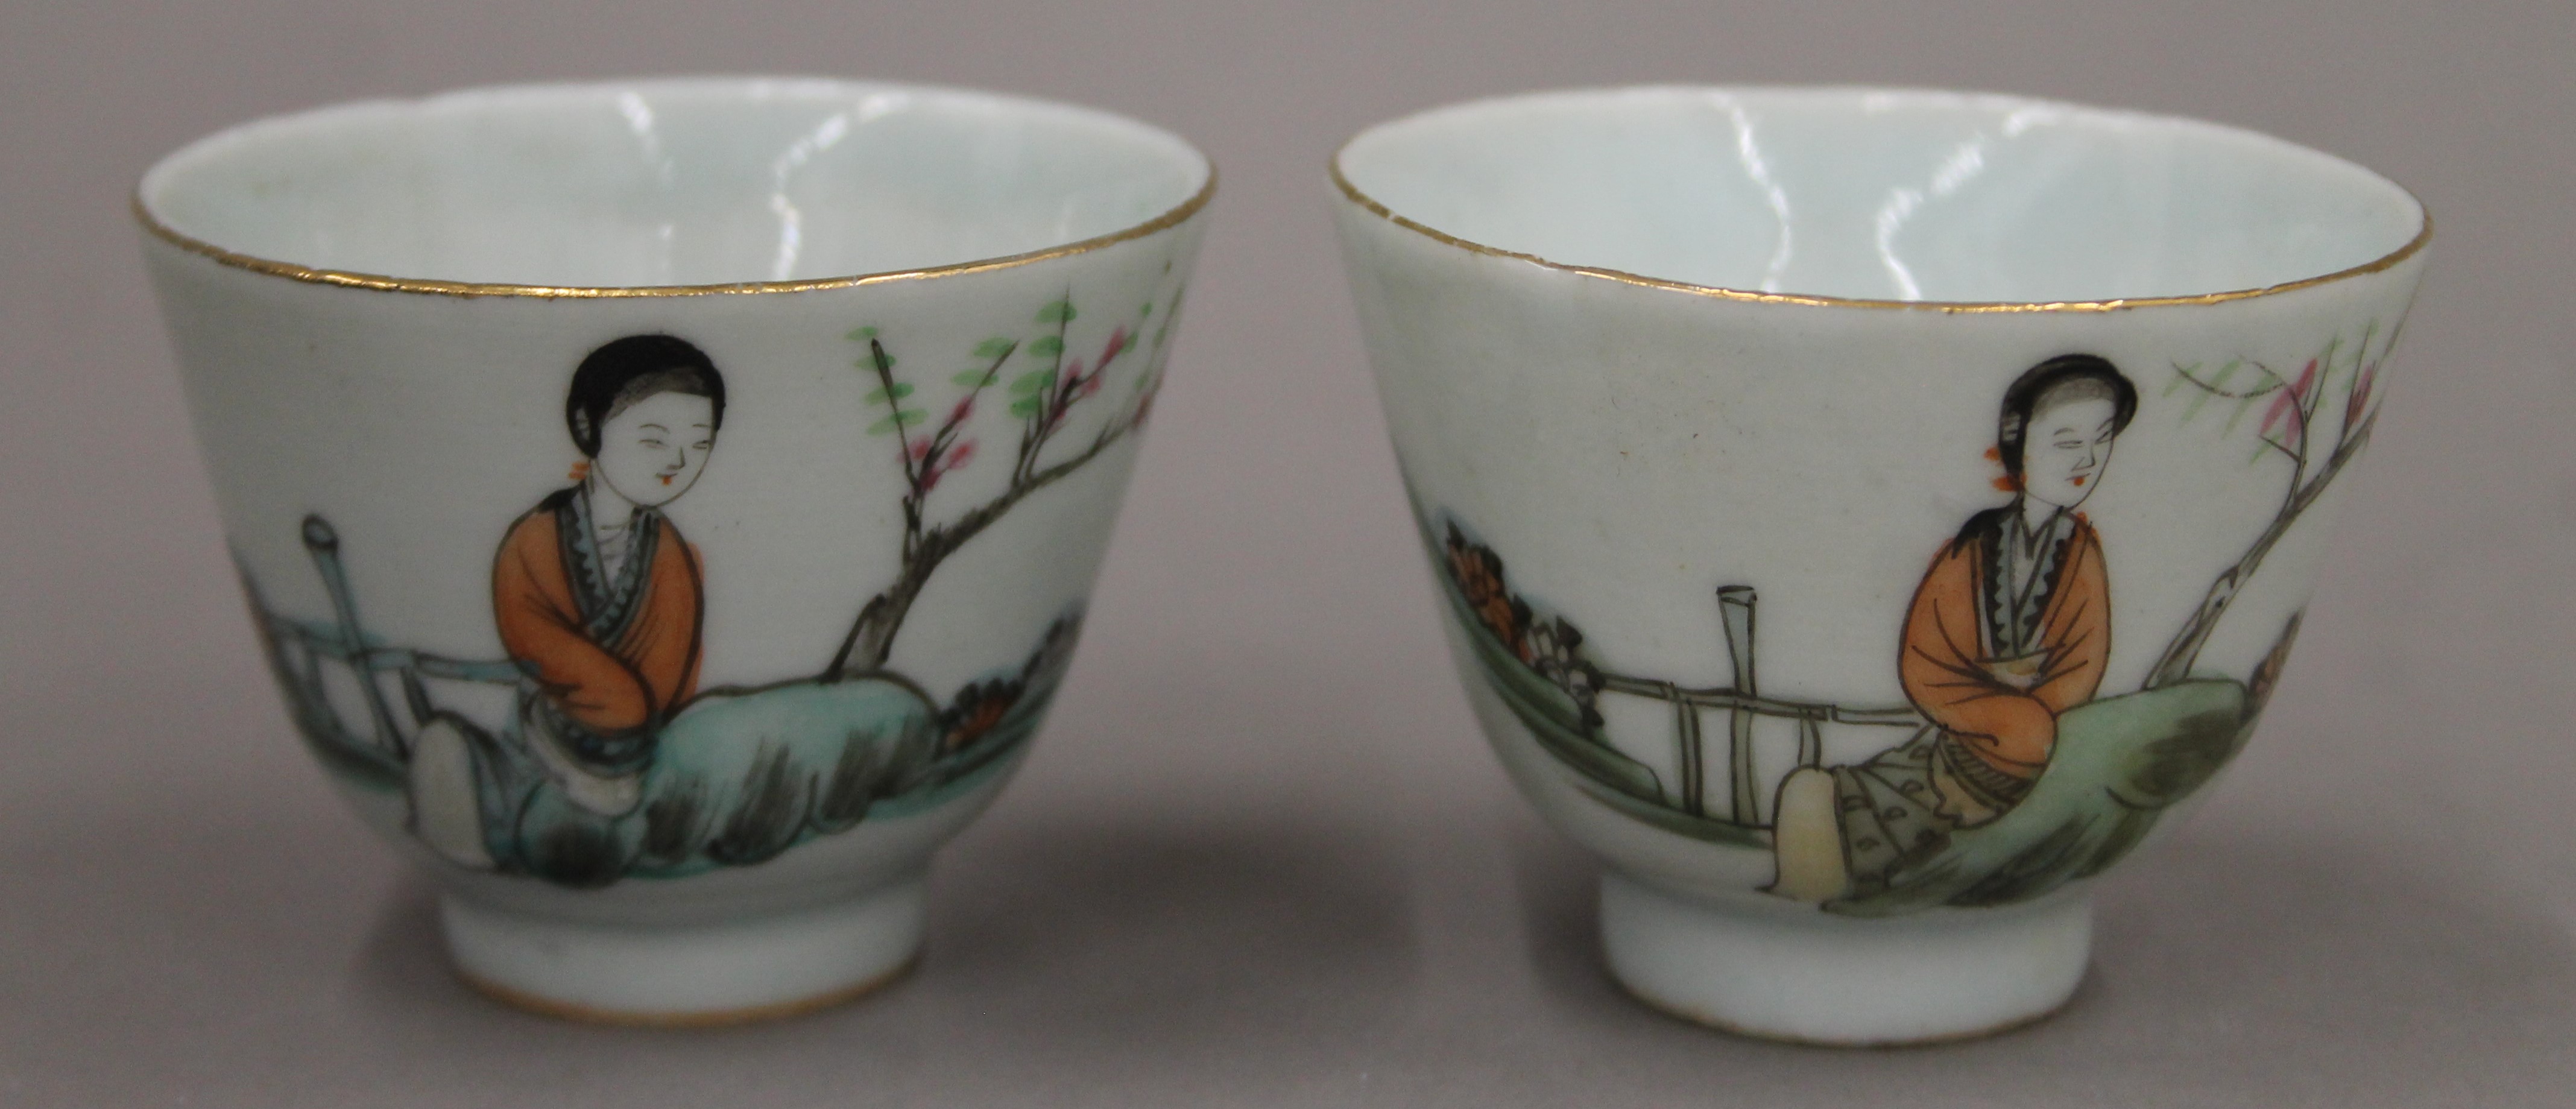 A late 19th/early 20th century Chinese teapot and two tea bowls, housed in a basket. - Image 6 of 11